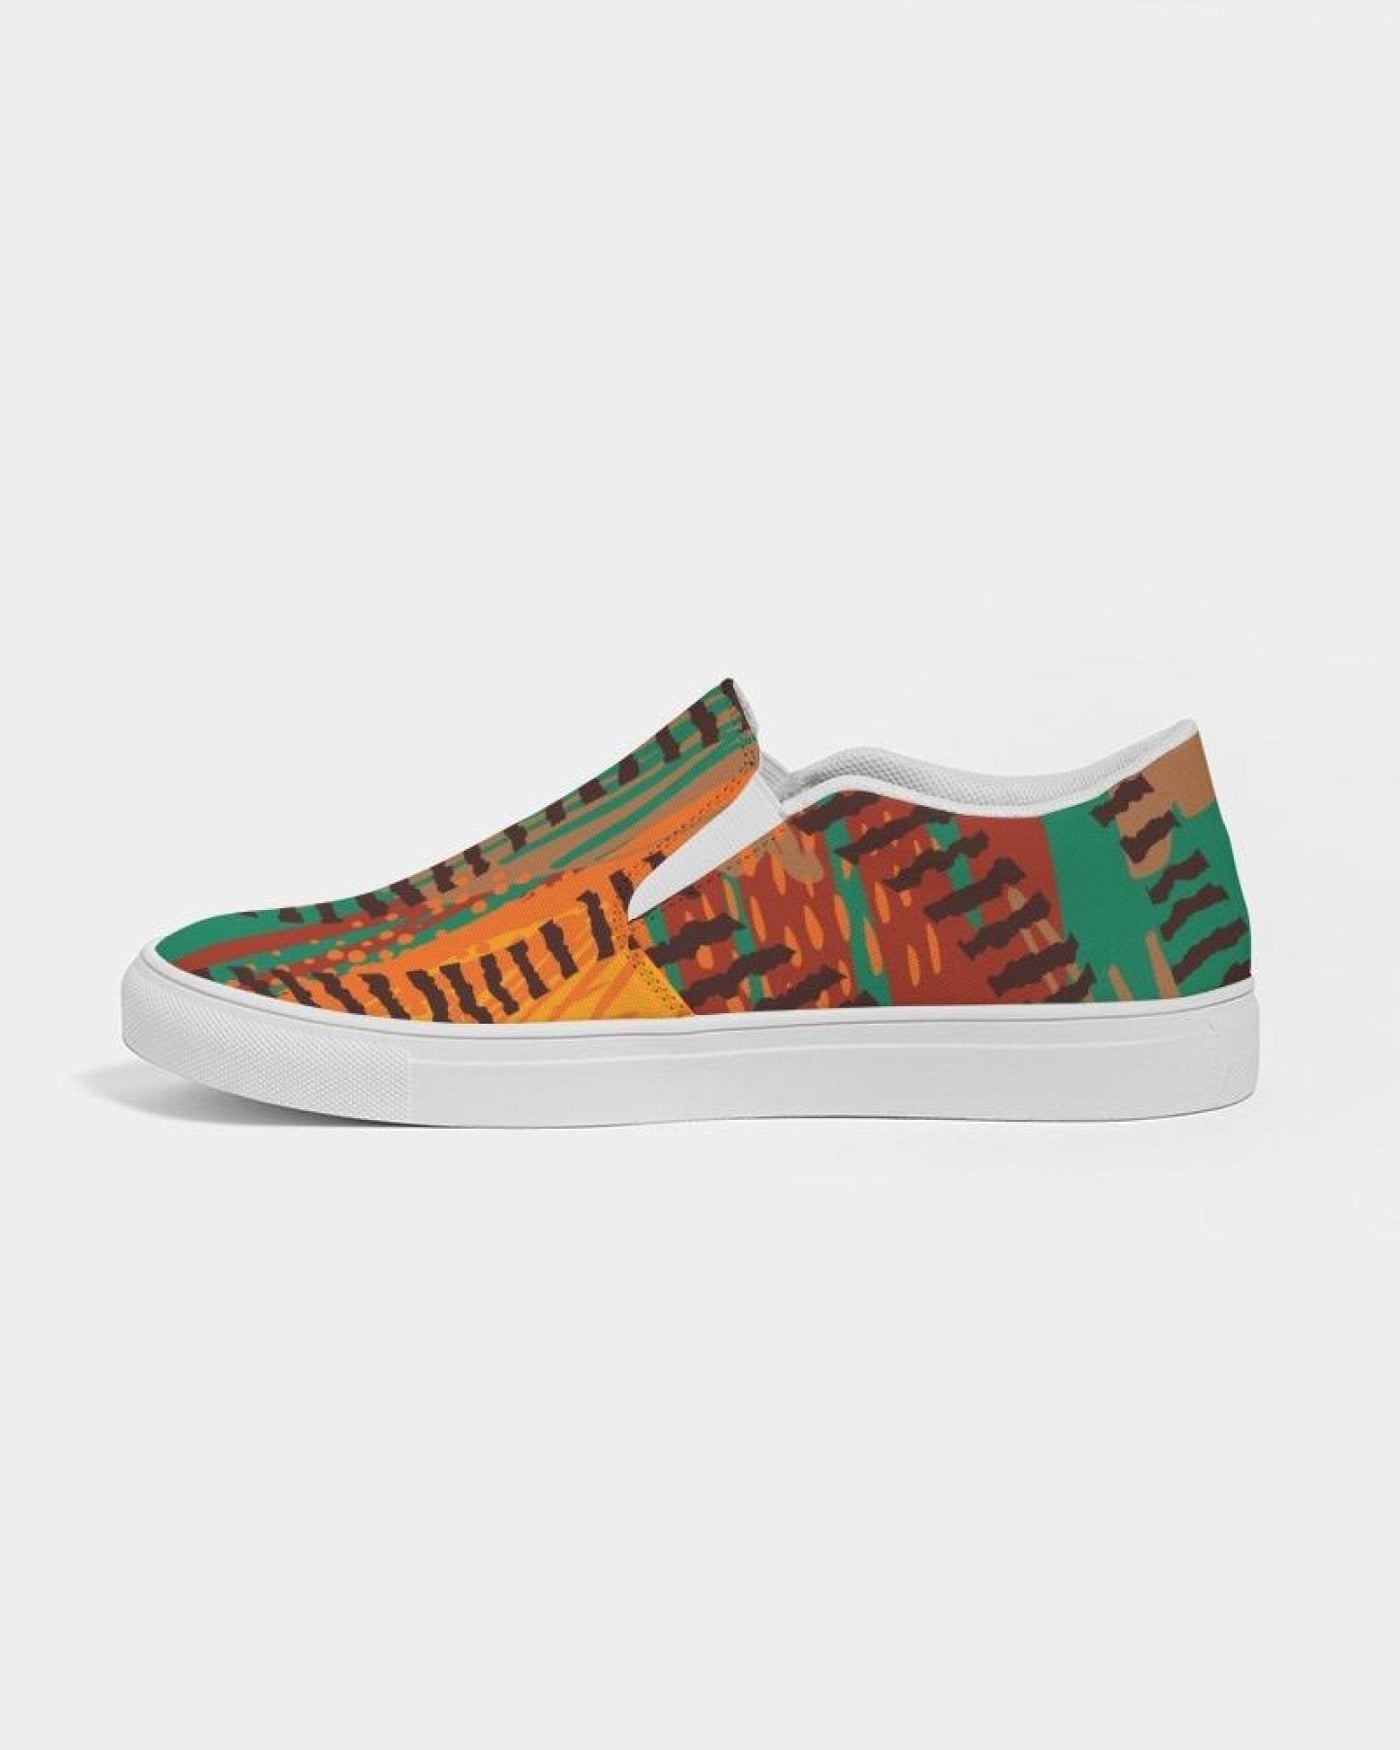 Womens Sneakers - Canvas Slip On Shoes Brown And Green Print